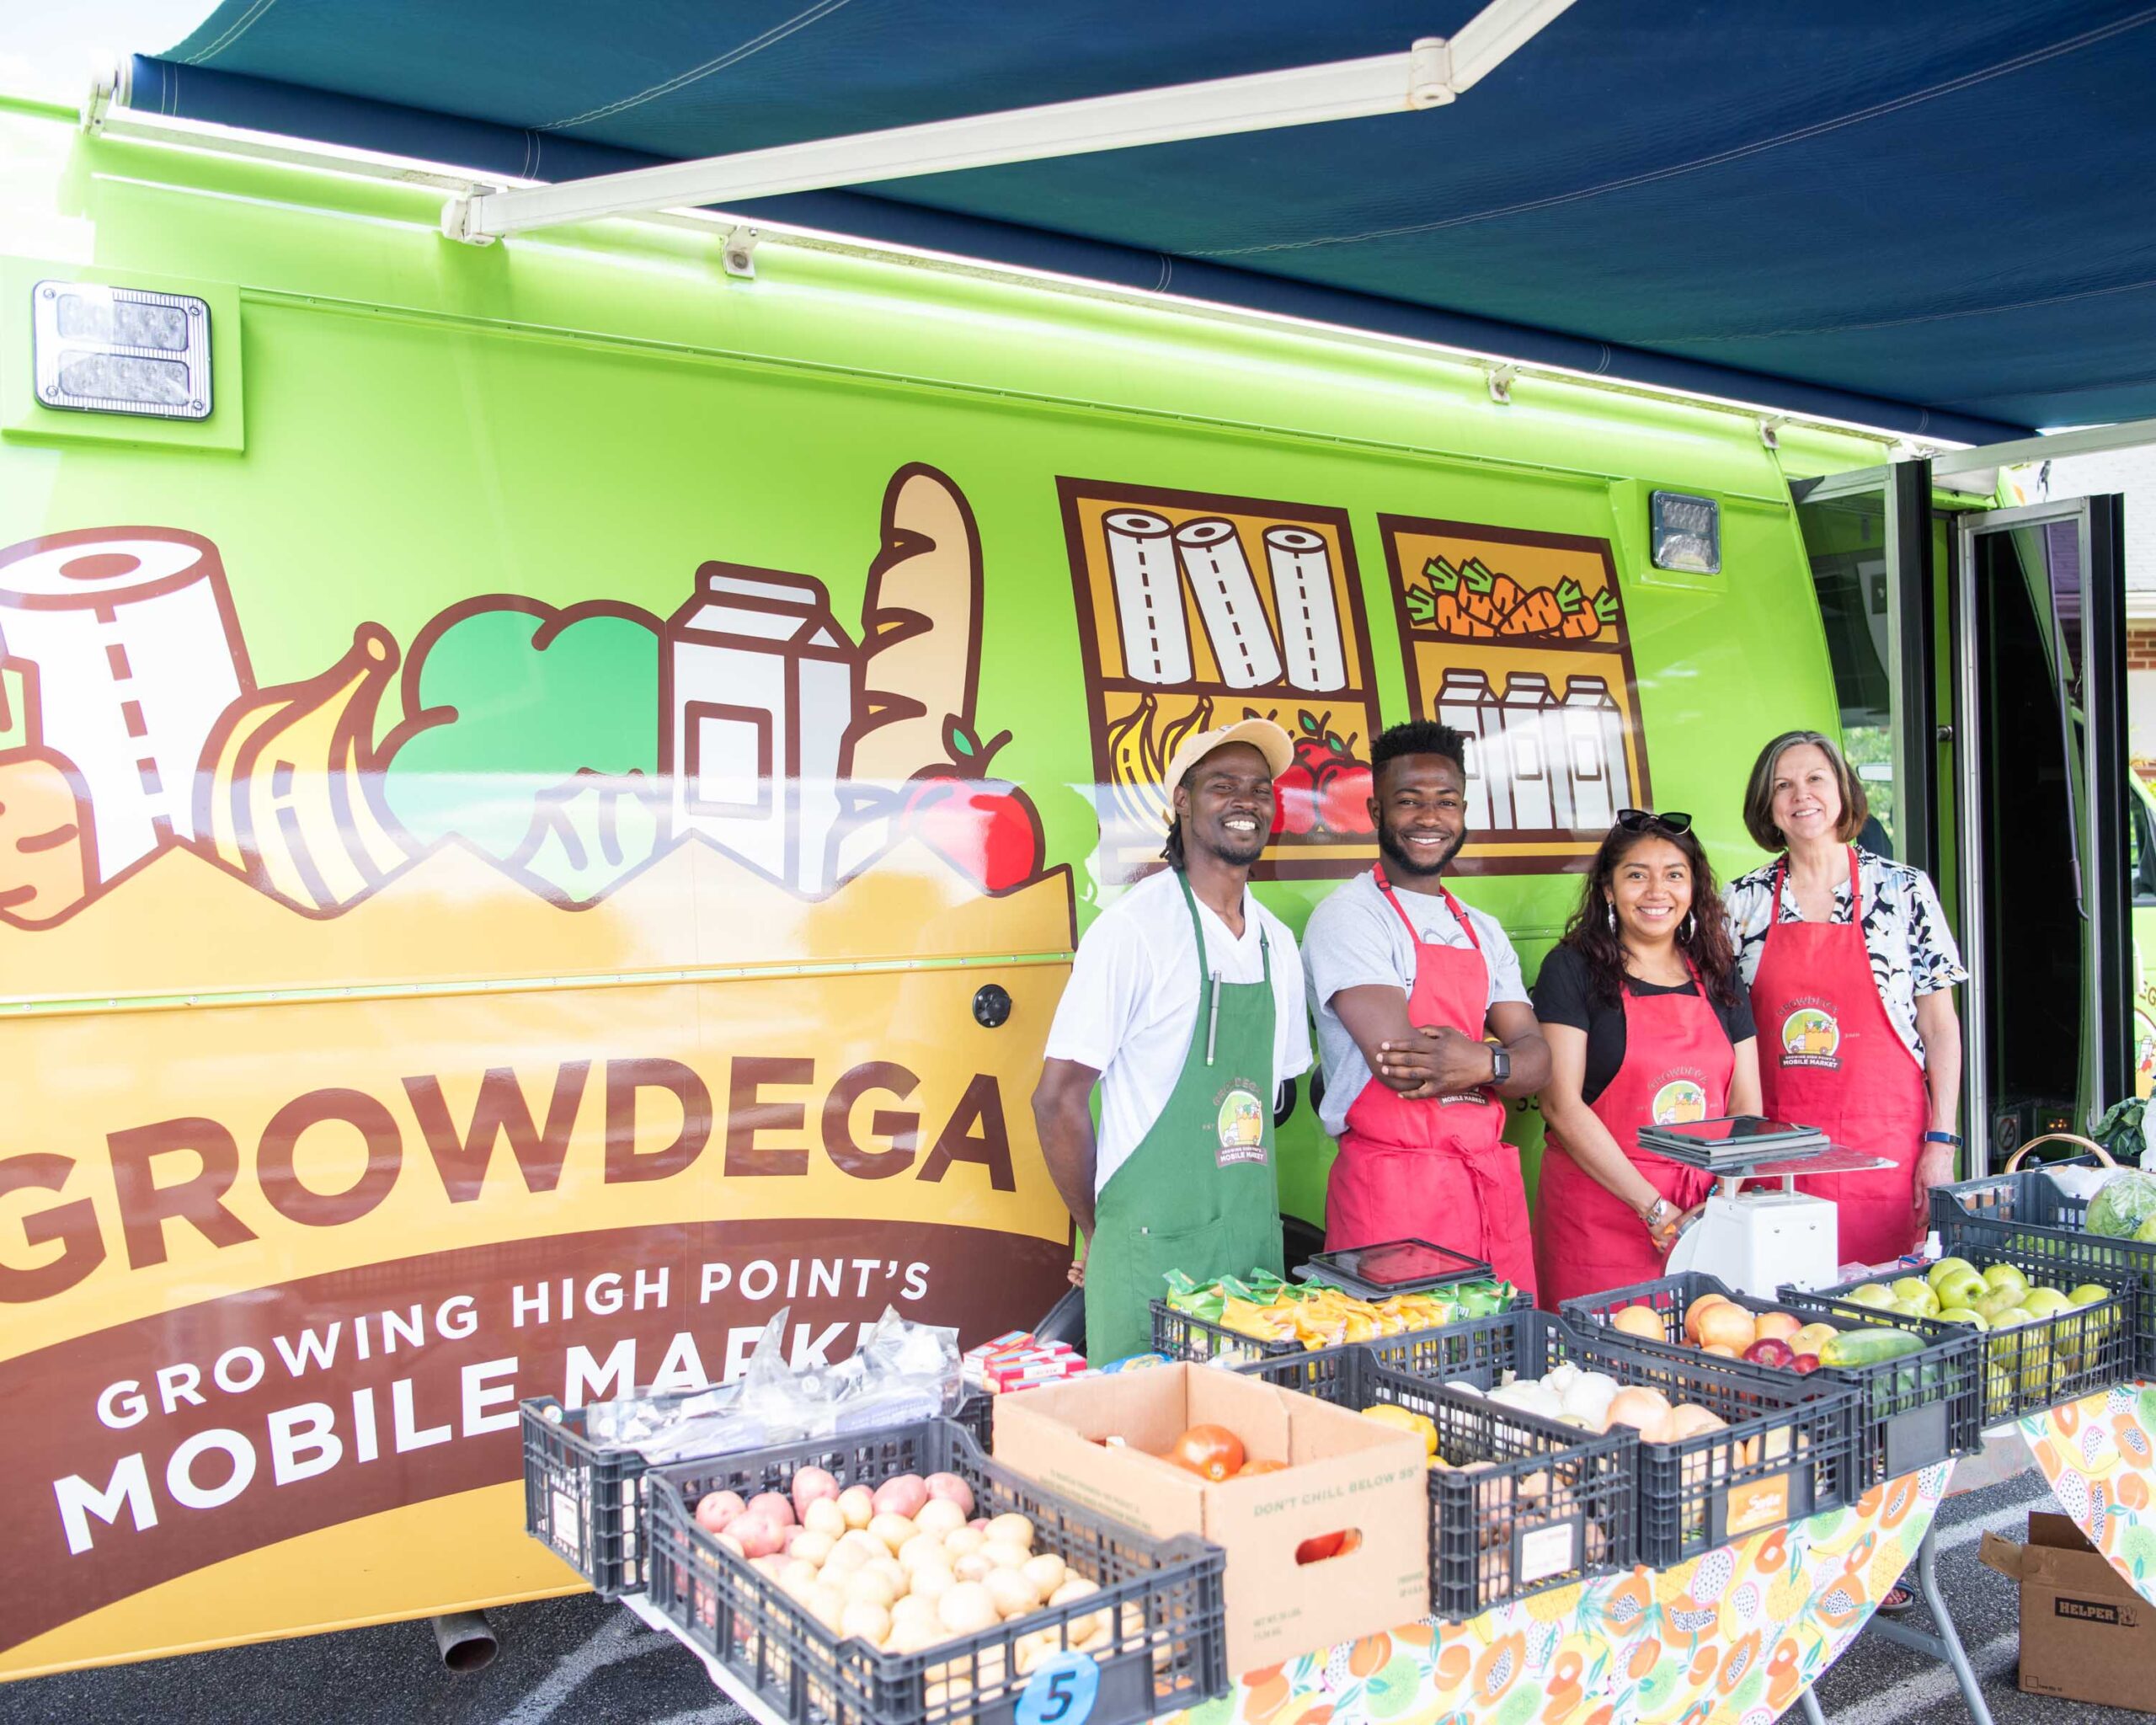 Employees of Growing High Point stand in front of Growdega, a mobile grocery store in High Point, NC.